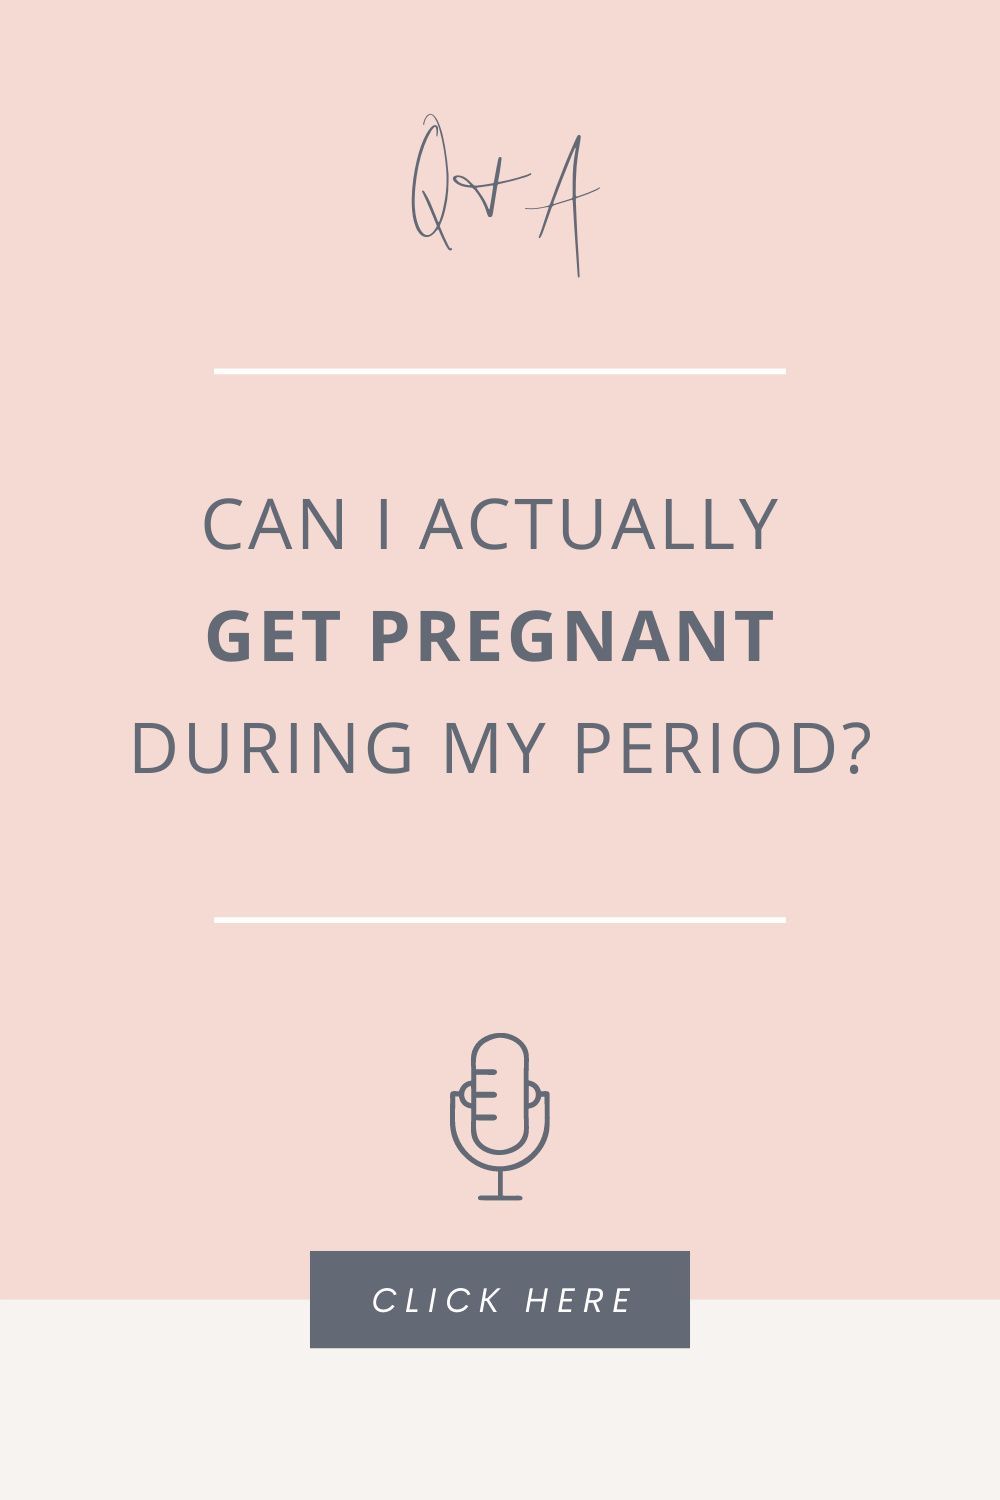 Can you get pregnant during your period?